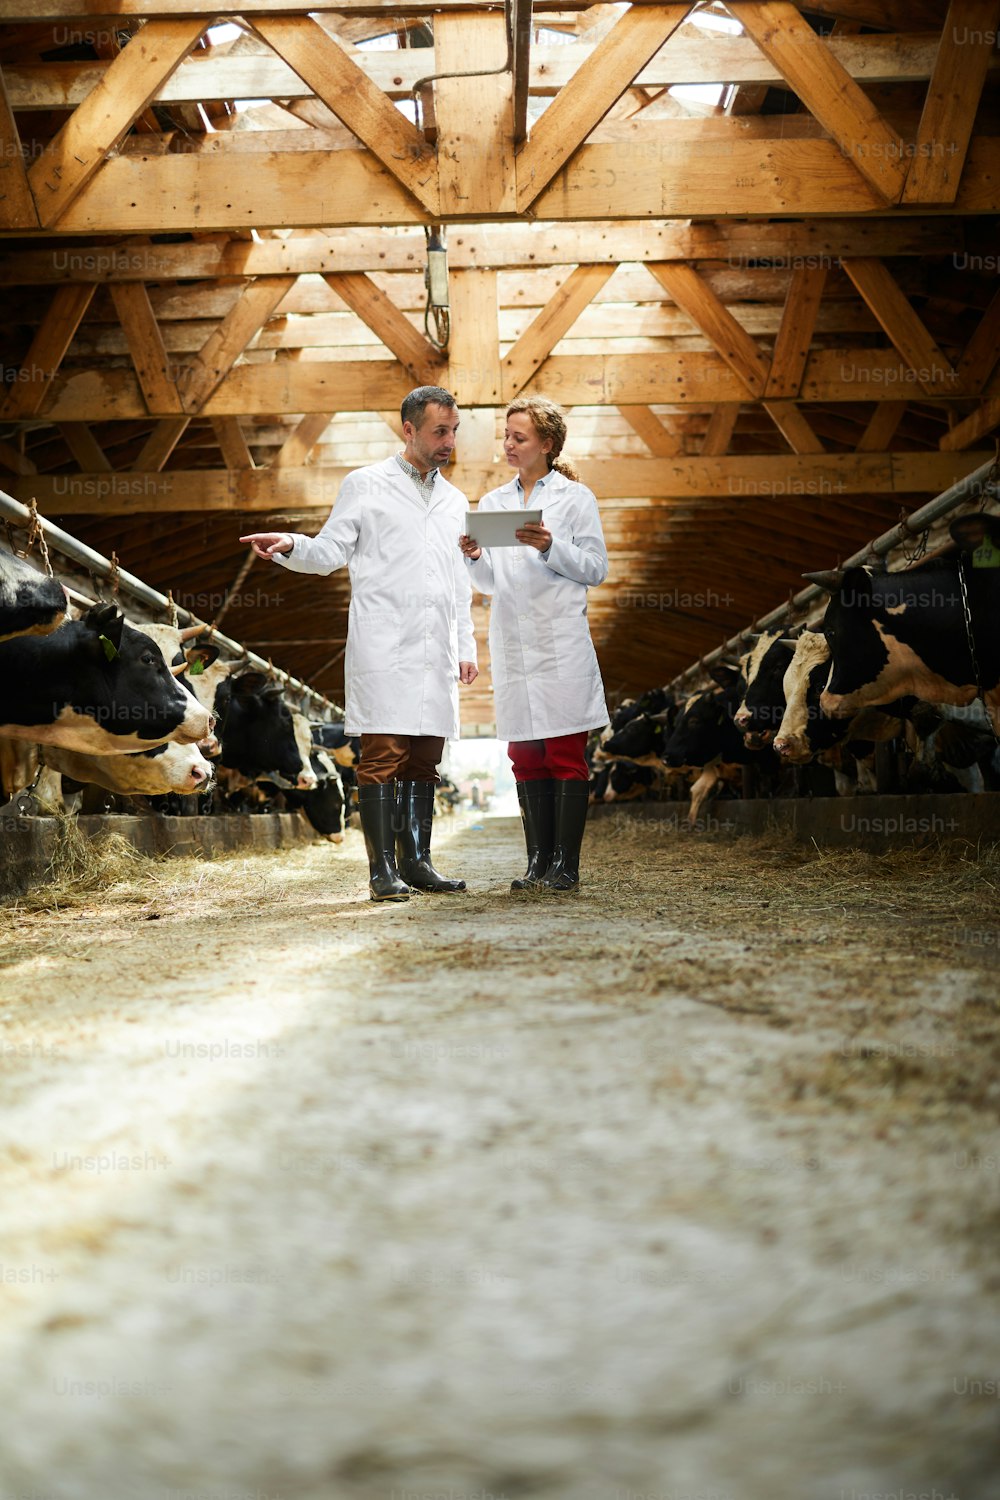 Full length portrait of two modern farm workers wearing lab coats walking by row of cows in shed inspecting livestock, copy space